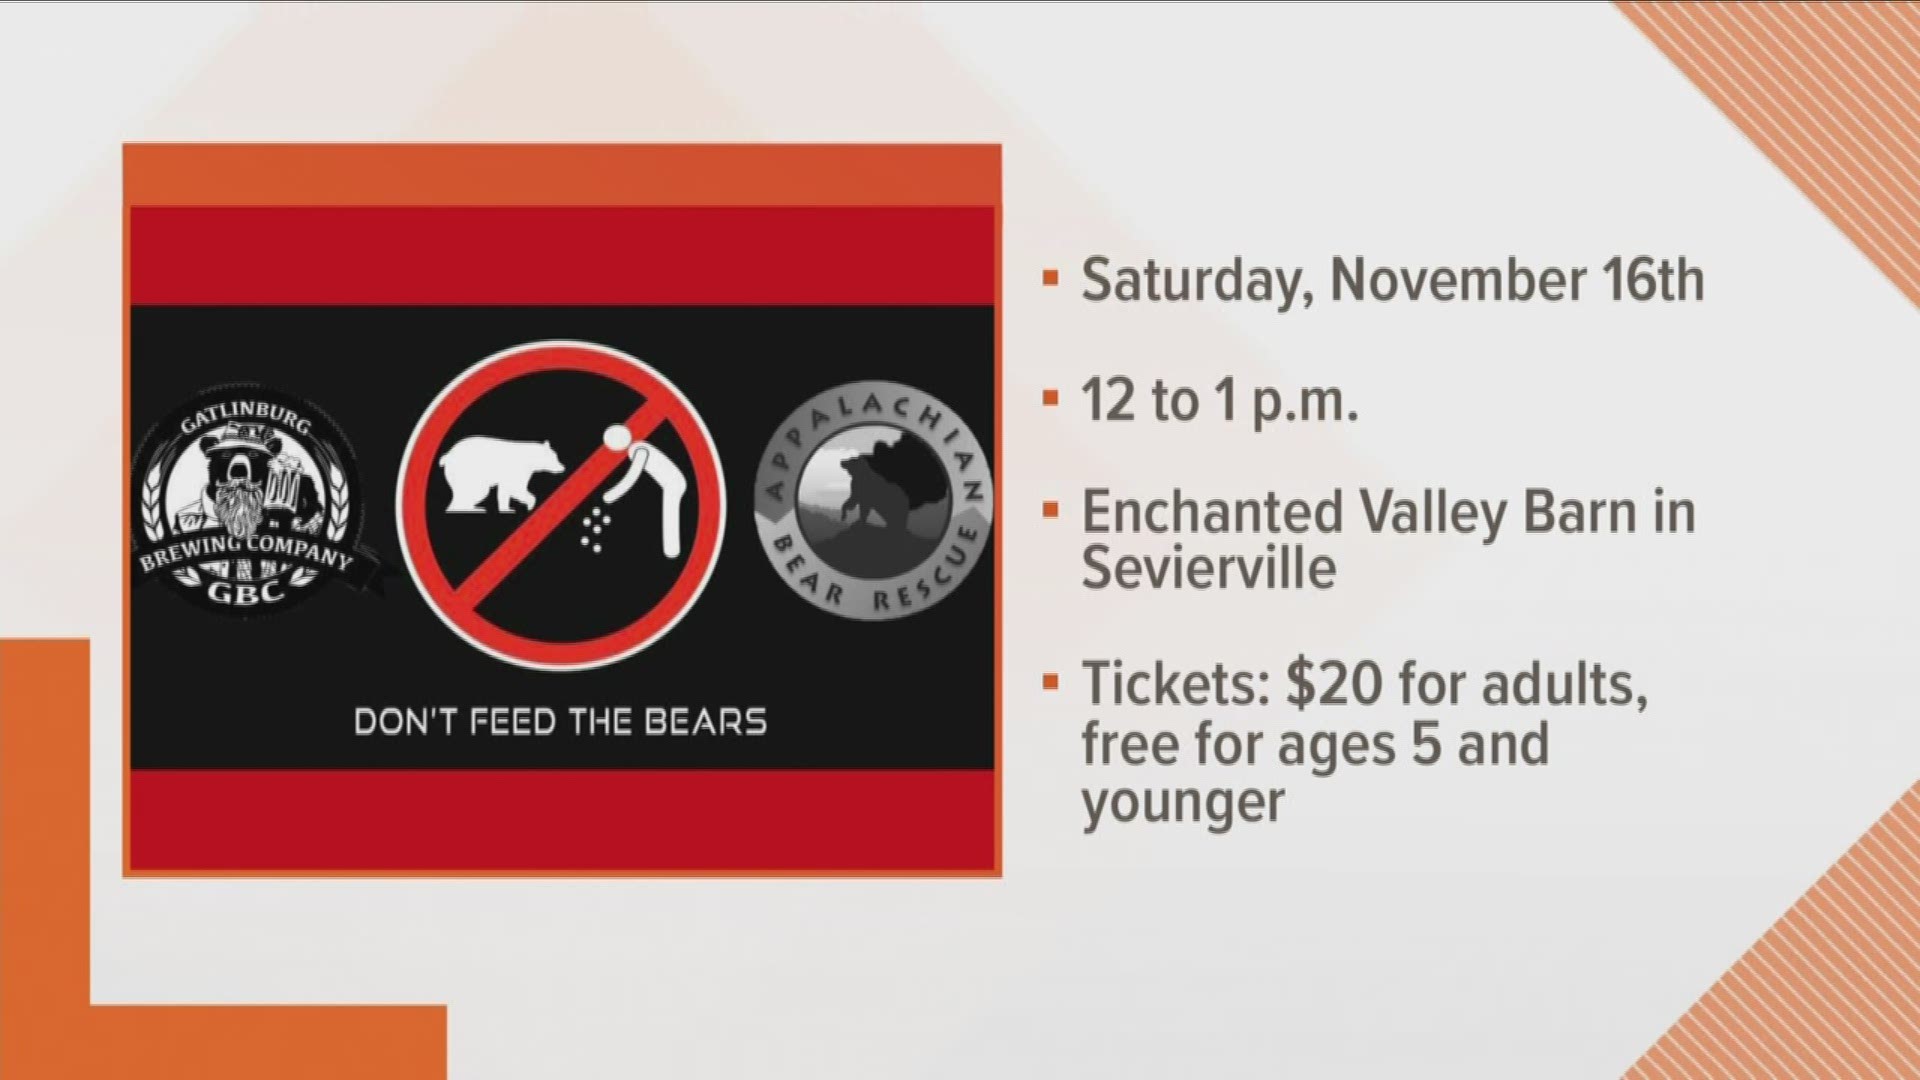 East Tennessee loves its bears and this weekend, Gatlinburg Brewing Company is hosting an event to help our outdoor friends.